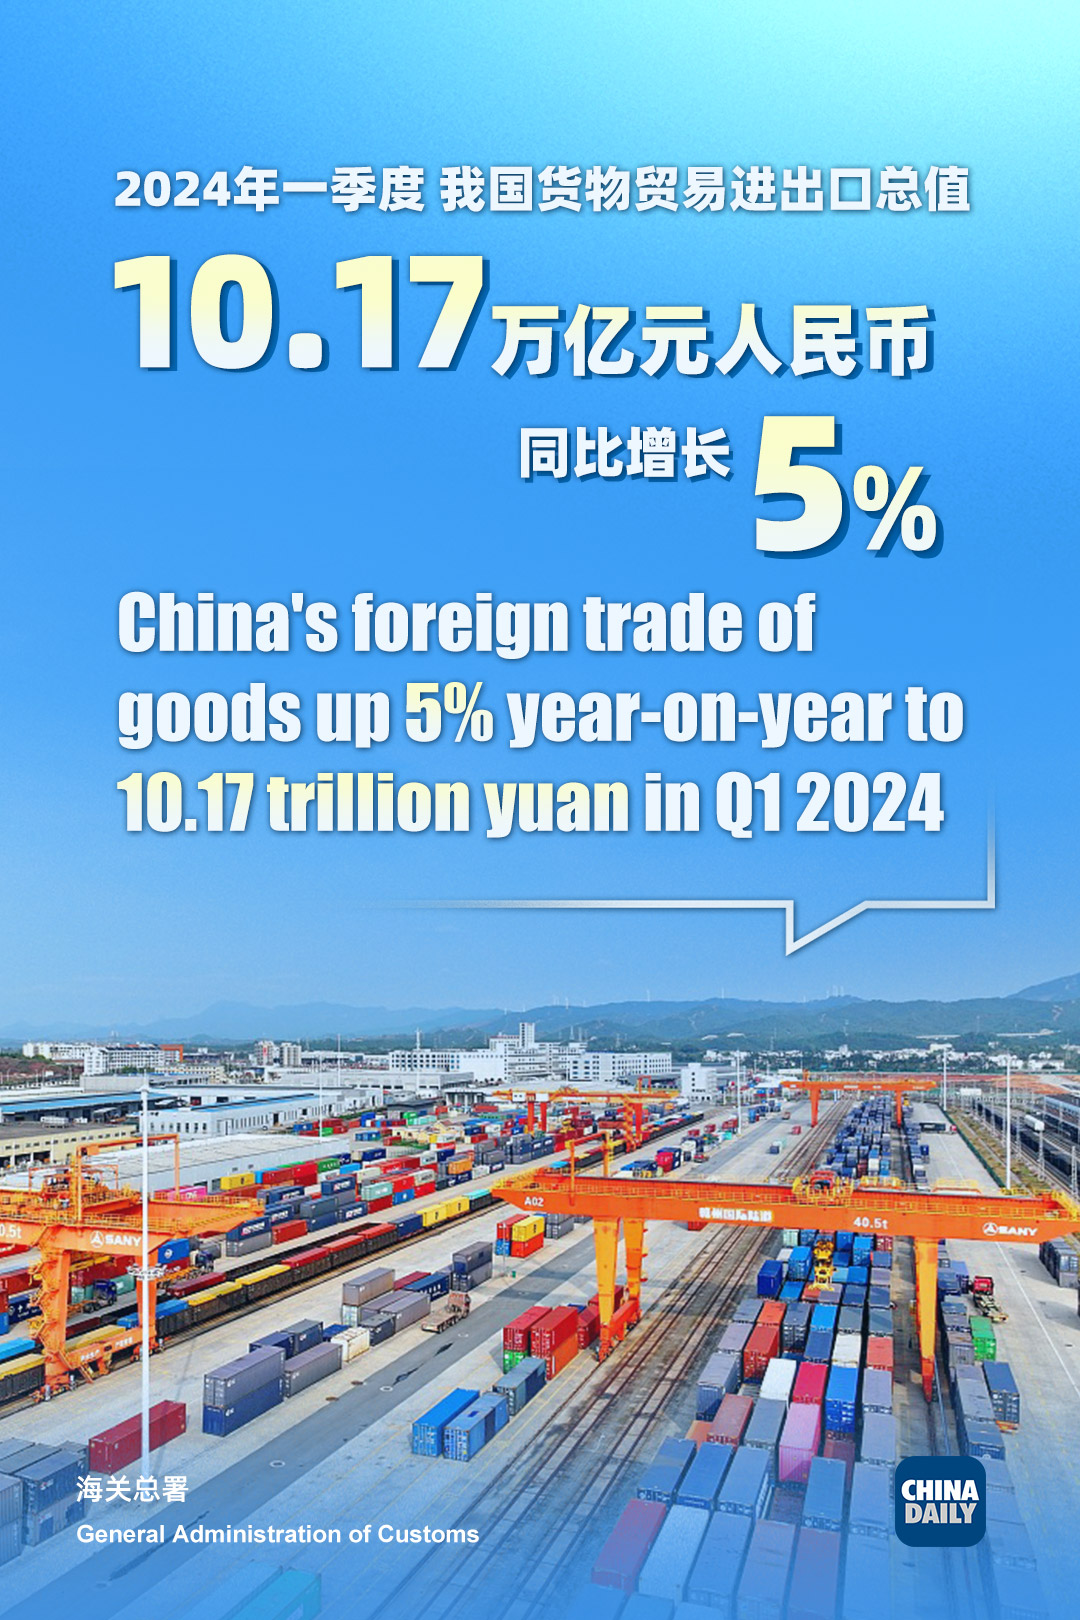 China's foreign trade of goods up 5% year-on-year to 10.17 trillion yuan in Q1 12024